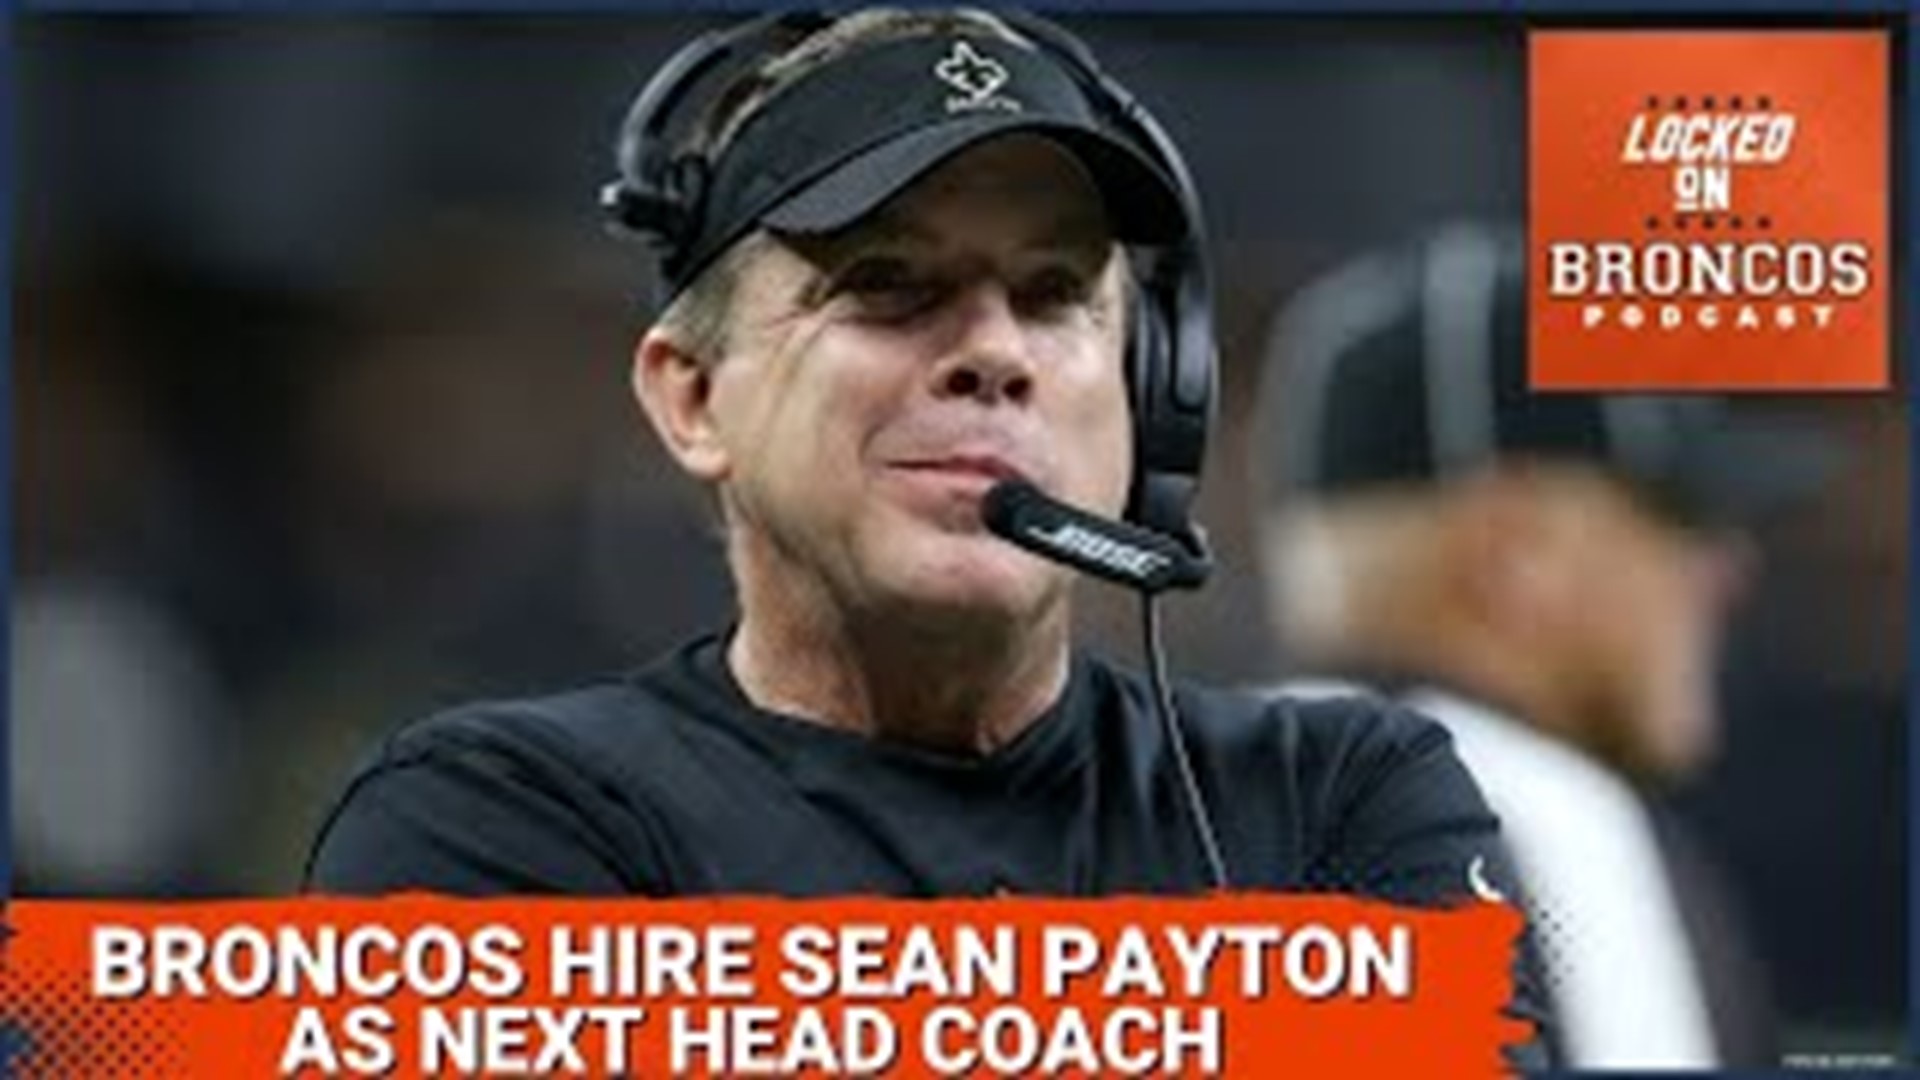 How does Sean Payton's hiring impact the Broncos organization as a whole?